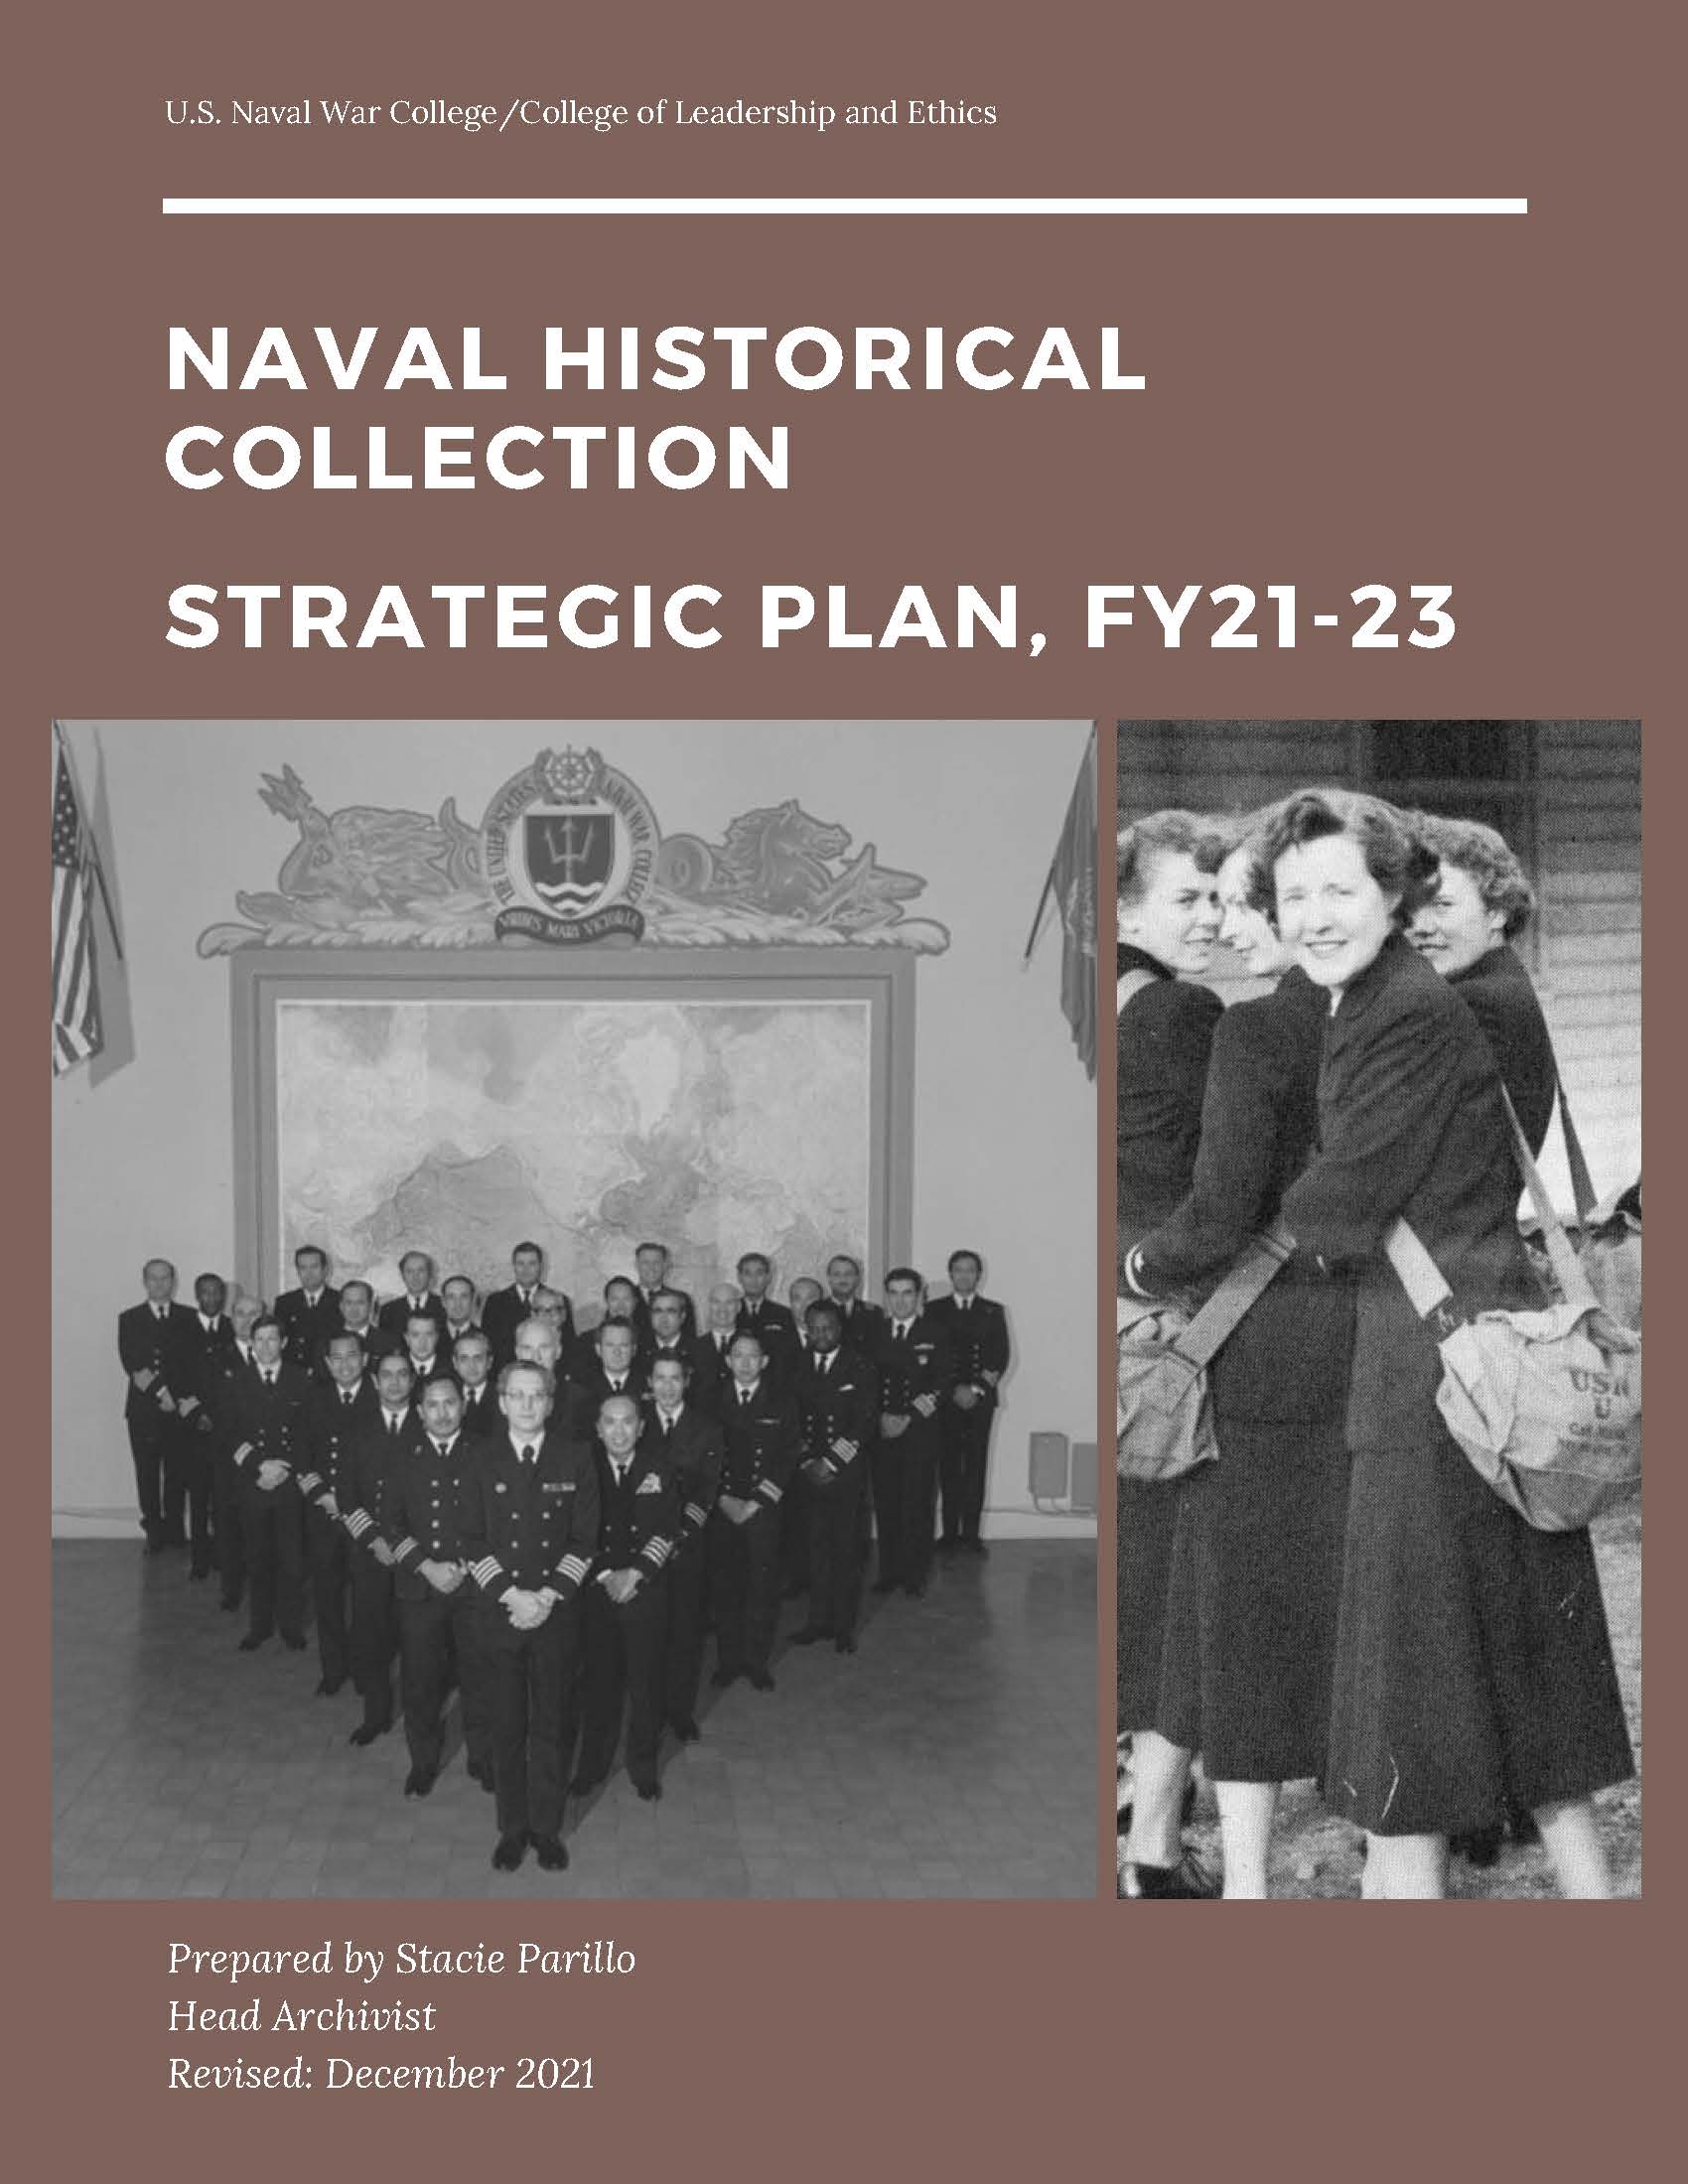 U.S. Naval Historical Collection Archives Strategic Plan FY 21-23